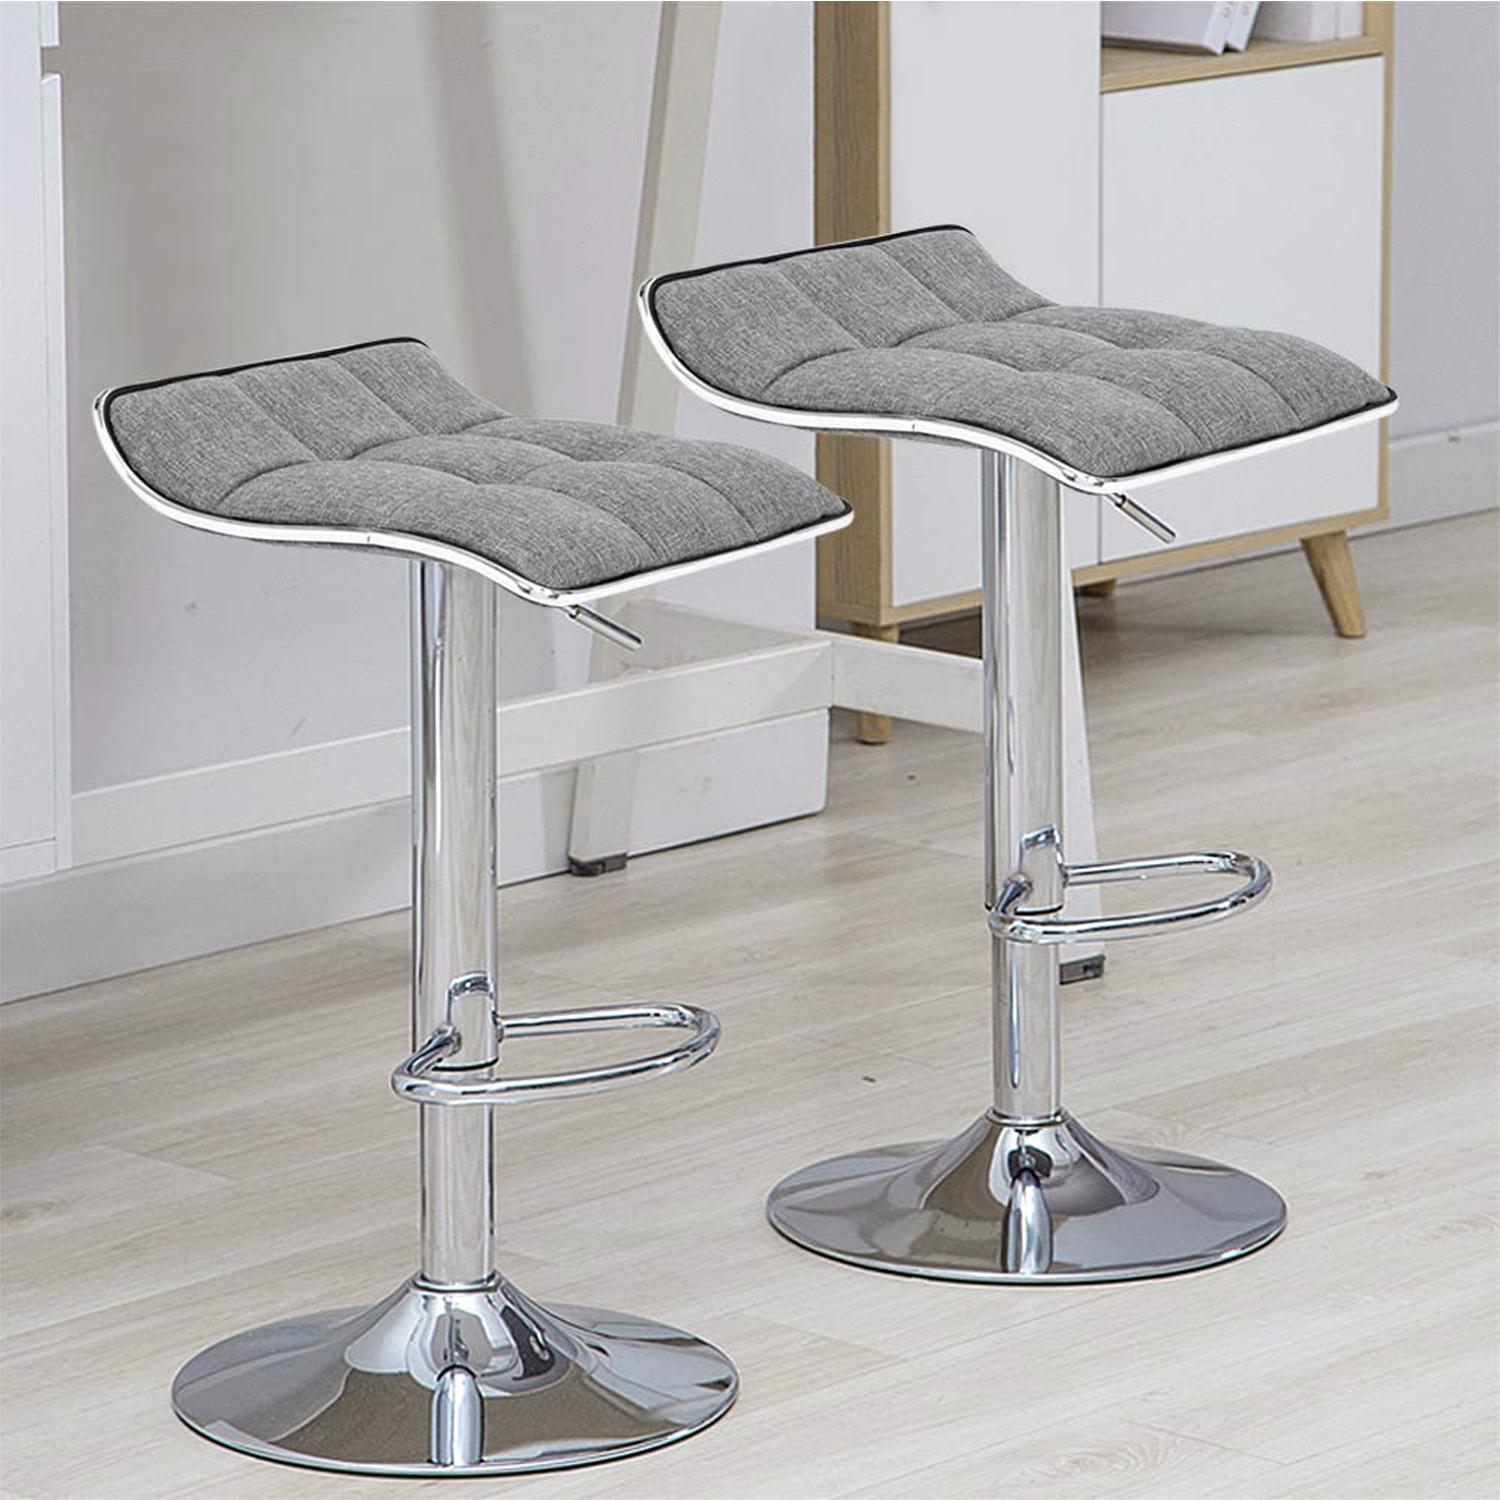 Gray ICOCO Modern Bar Stools Set of 2 with Backrest and Footrest,Breakfast Kitchen Bar Stool Chairs Adjustable Swivel Gas Lift,Pub Barstools with Leatherette Exterior